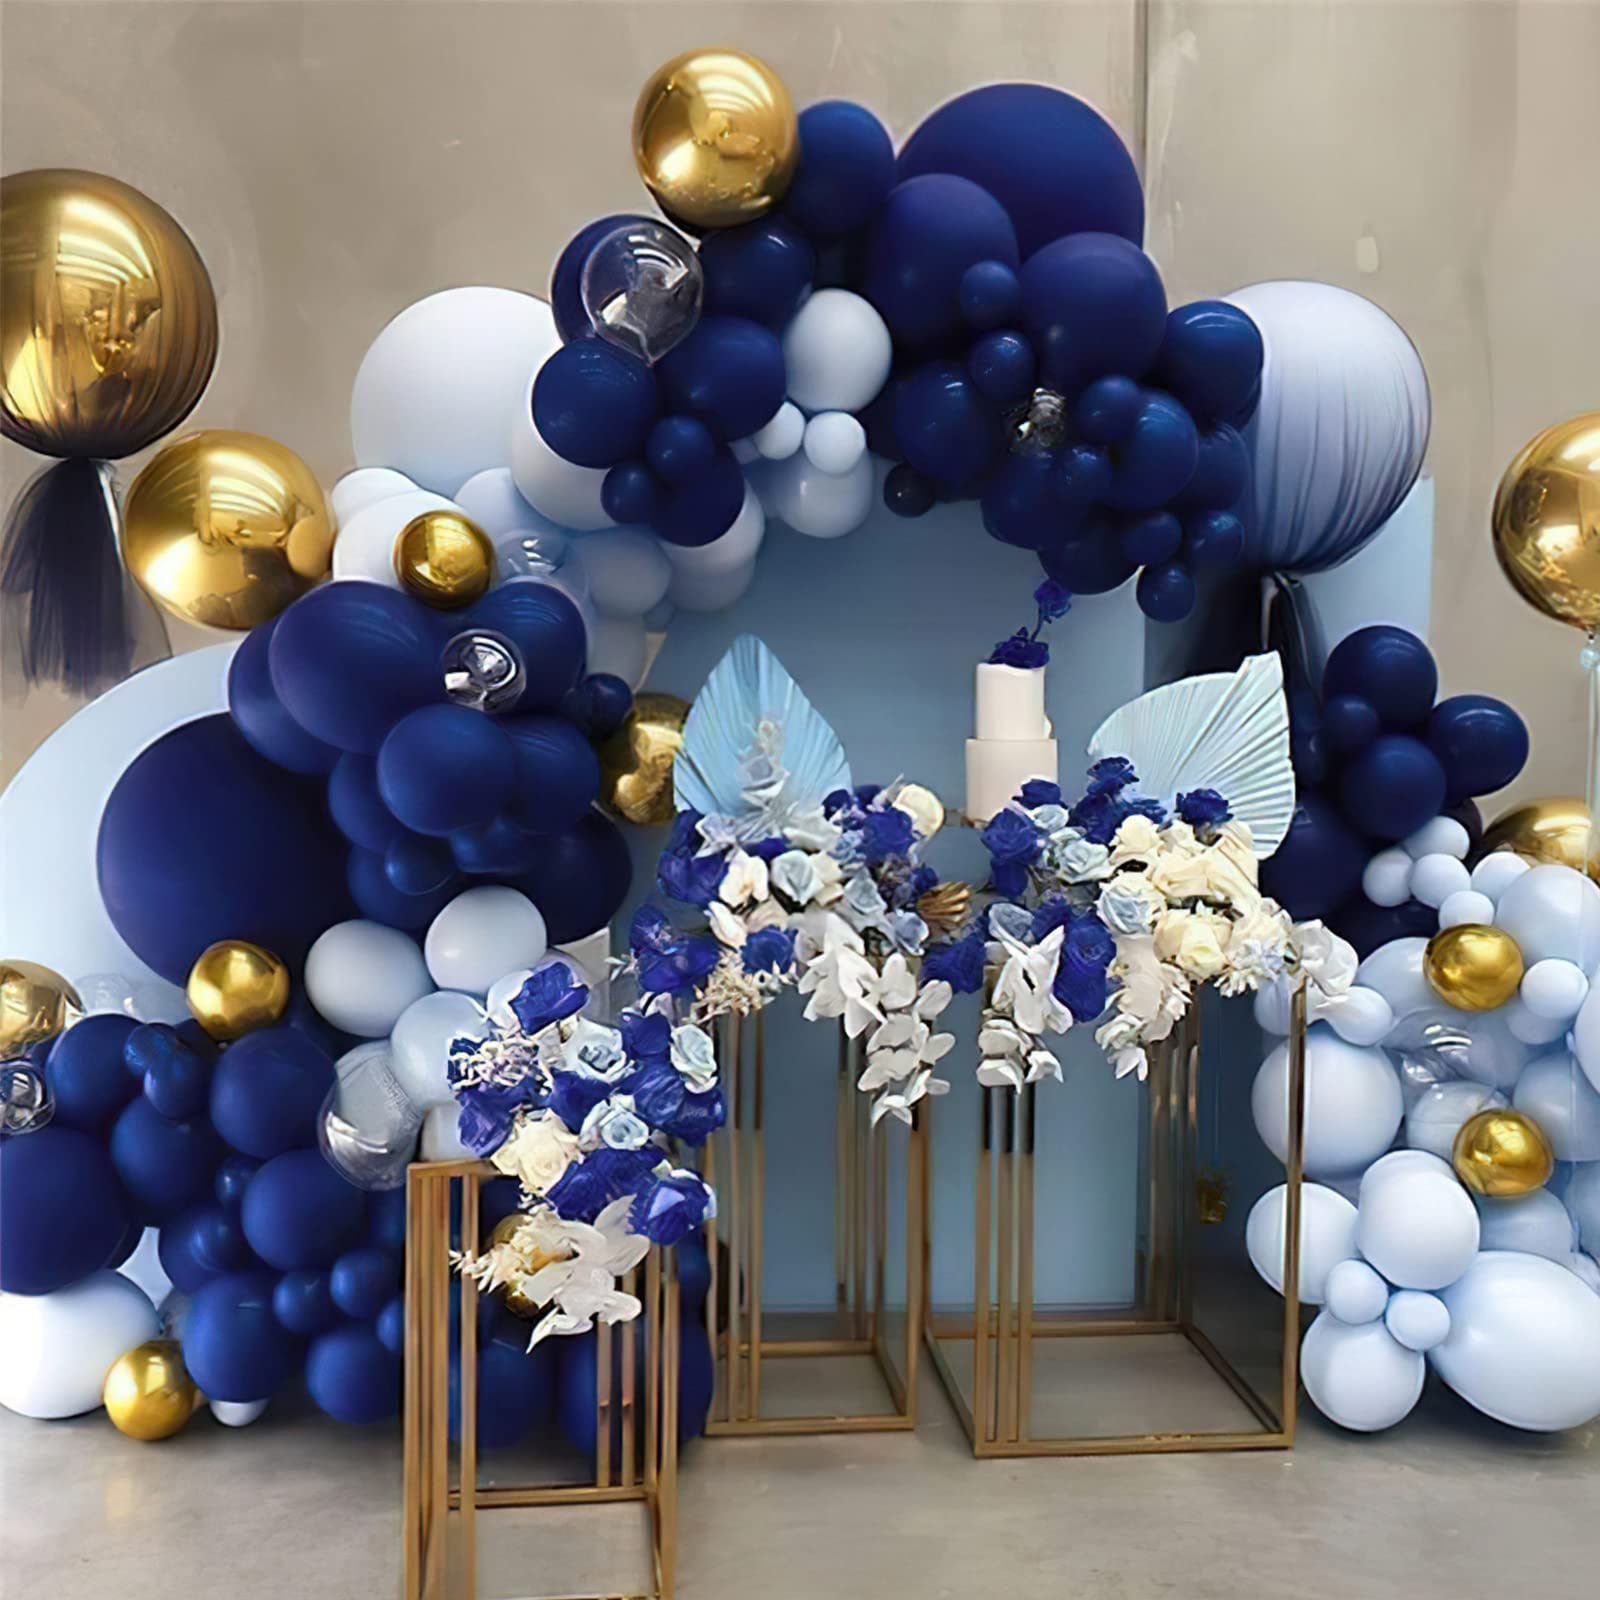 PartyWoo Navy Blue Balloons, 140 pcs Pearl Navy Blue Balloons Different Sizes Pack of 18 Inch 12 Inch 10 Inch 5 Inch Navy Balloons for Balloon Garland or Balloon Arch as Party Decorations, Blue-Z90